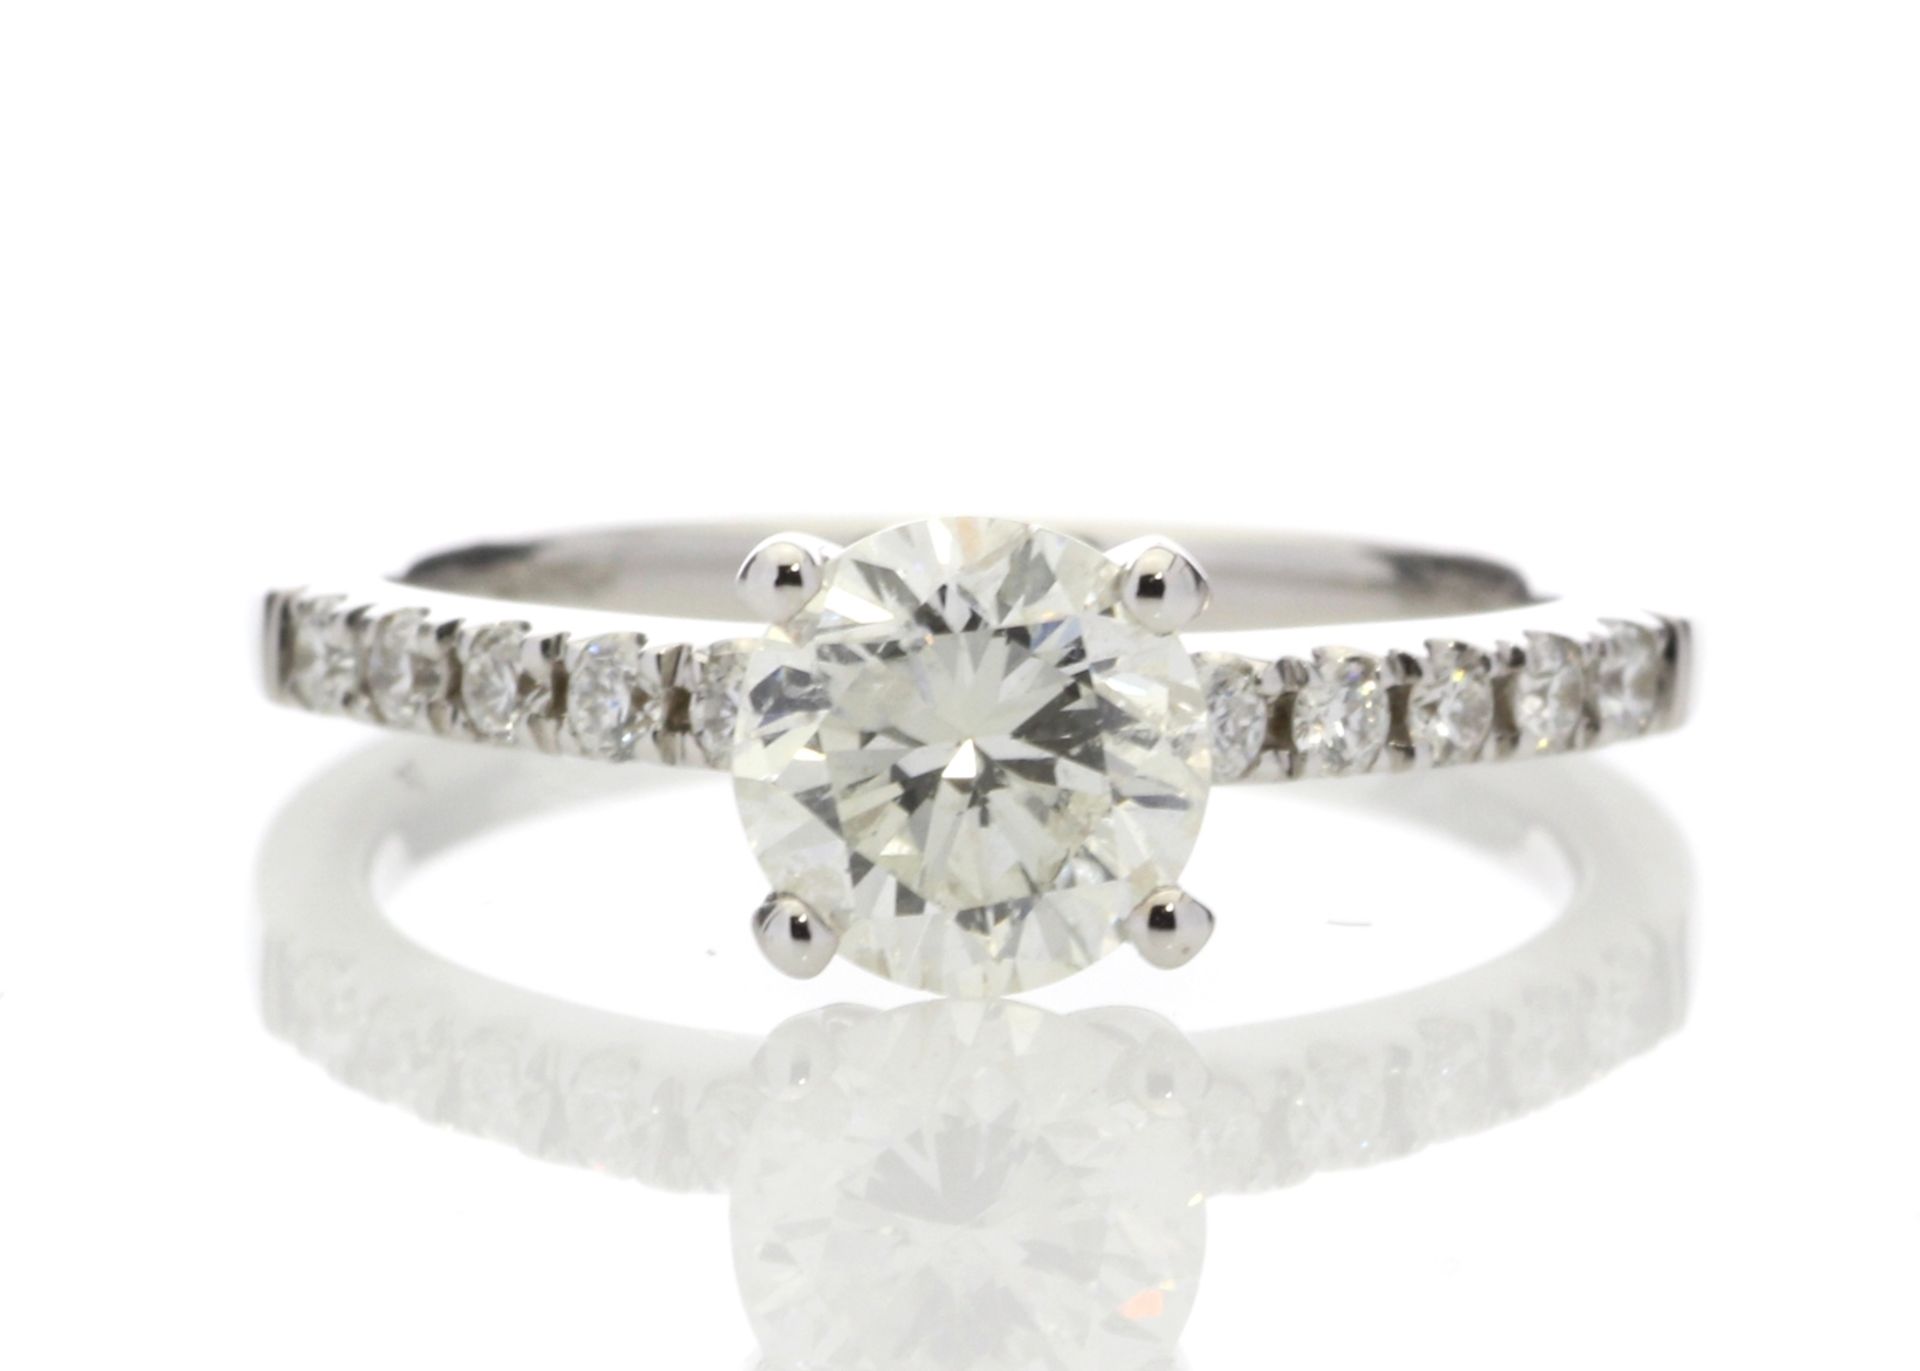 18ct White Gold Single Stone Diamond Ring With Stone Set Shoulders (1.07) 1.25 Carats